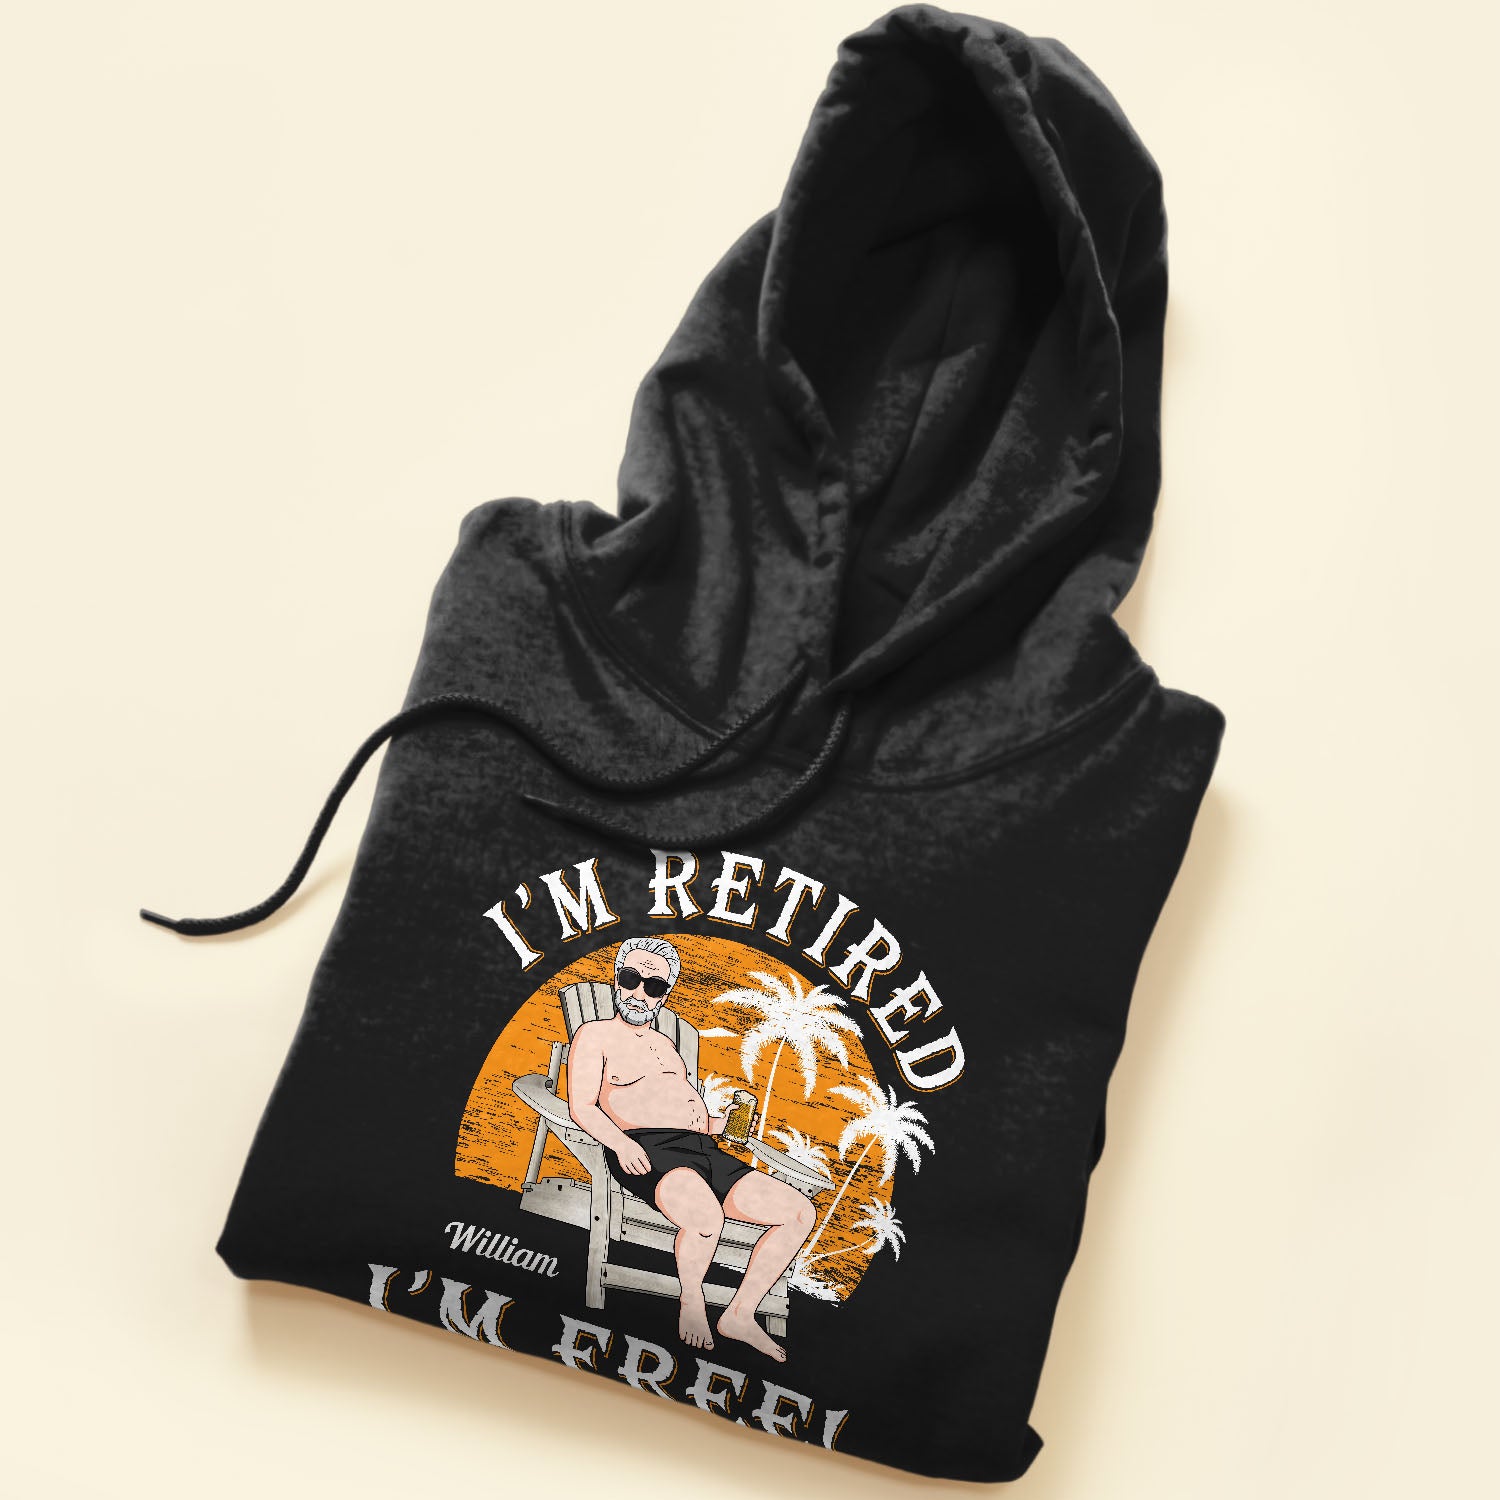 I'm Retired, I'm Free - Personalized Shirt - Retirement Gift For Colleagues, Dad, Grandpa, Husband